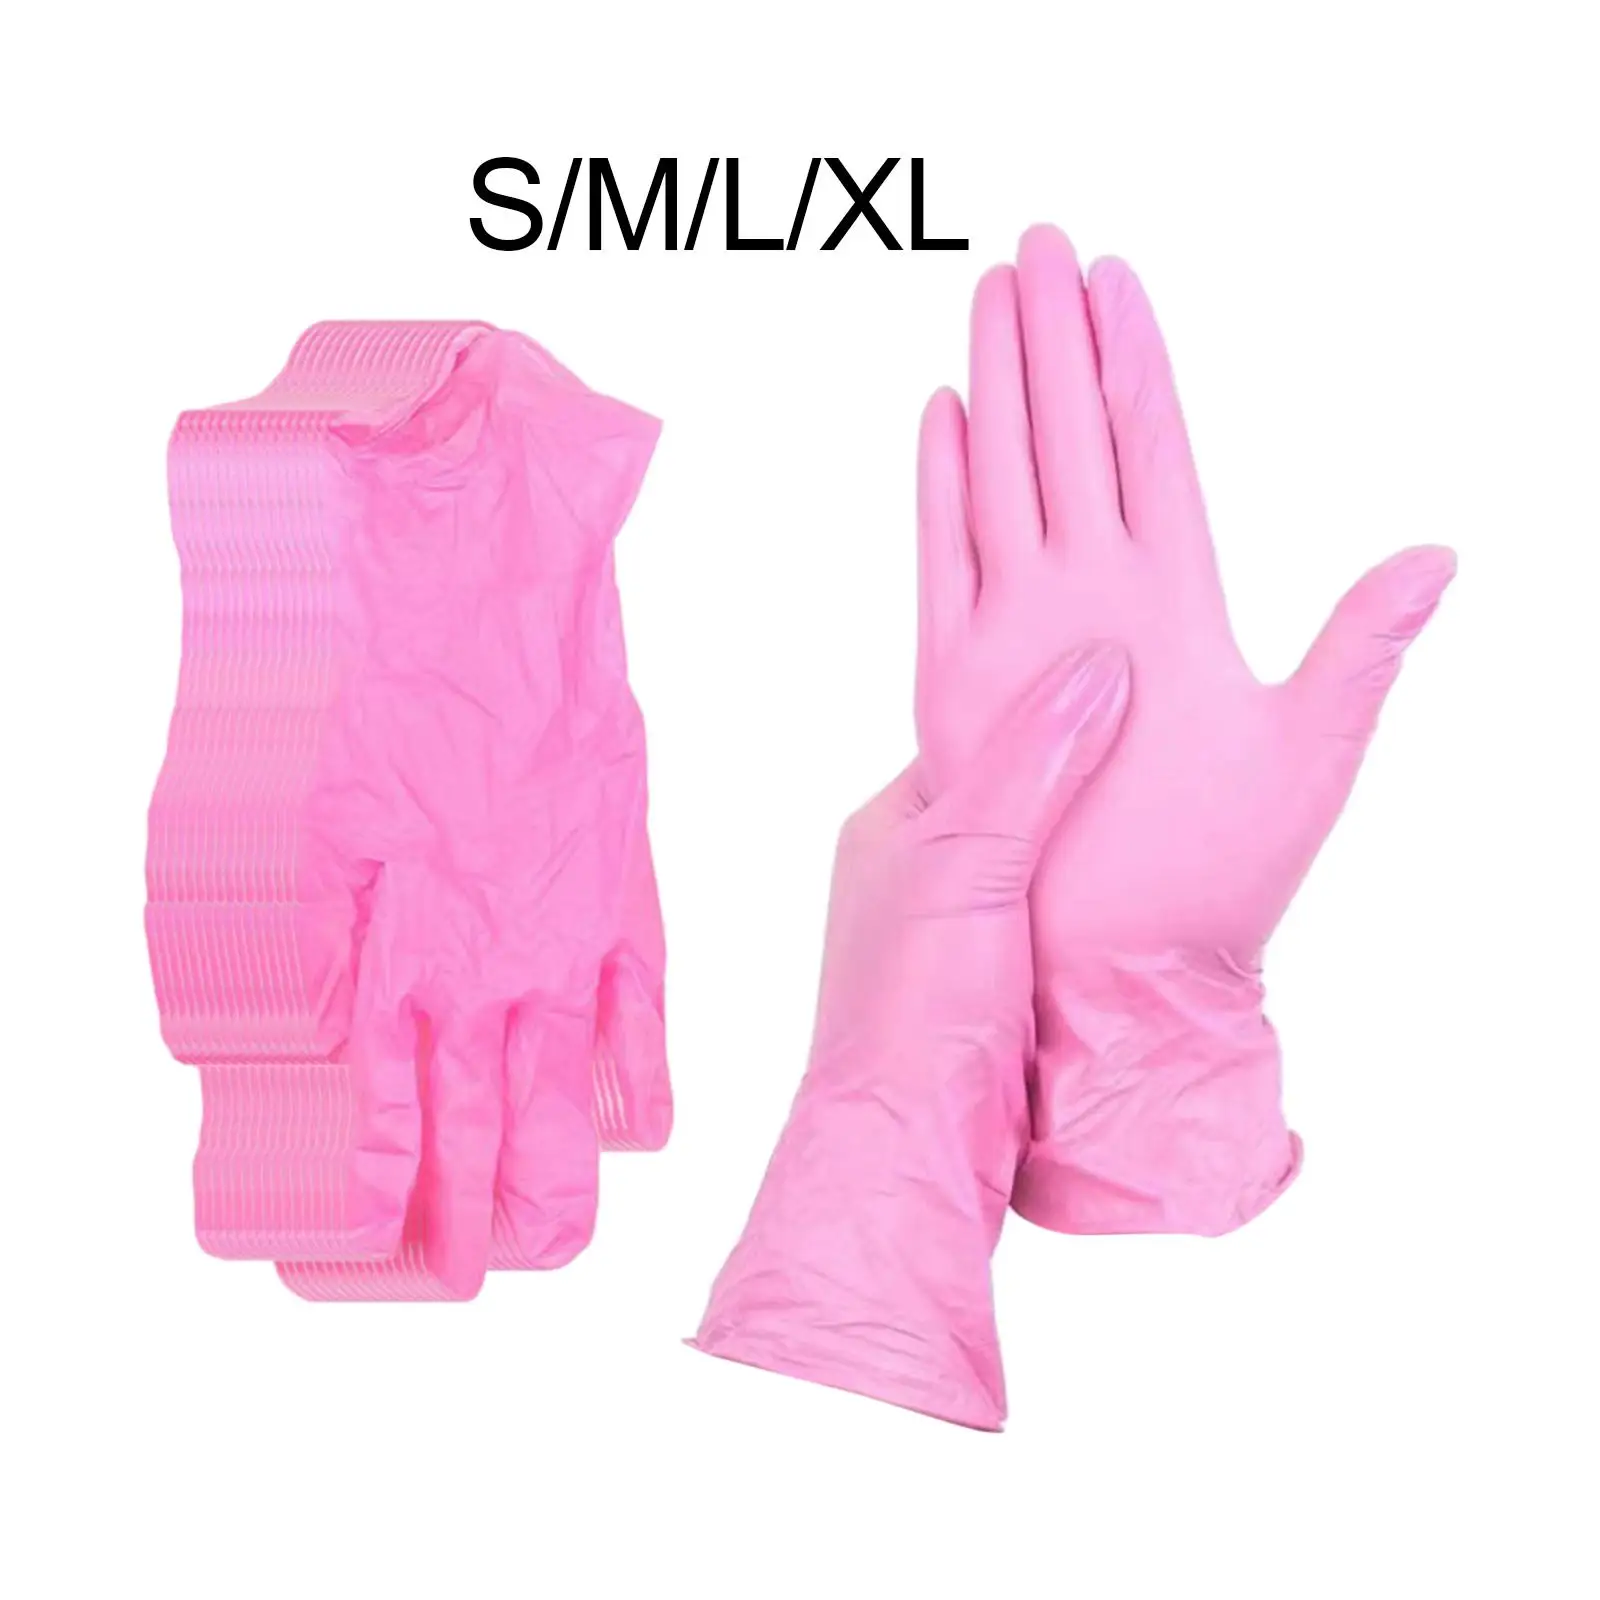 100x Nitrile Disposable Gloves Latex Free Powder Free Disposable Gloves for Office Caterers Cooking Cleaners Gardeners